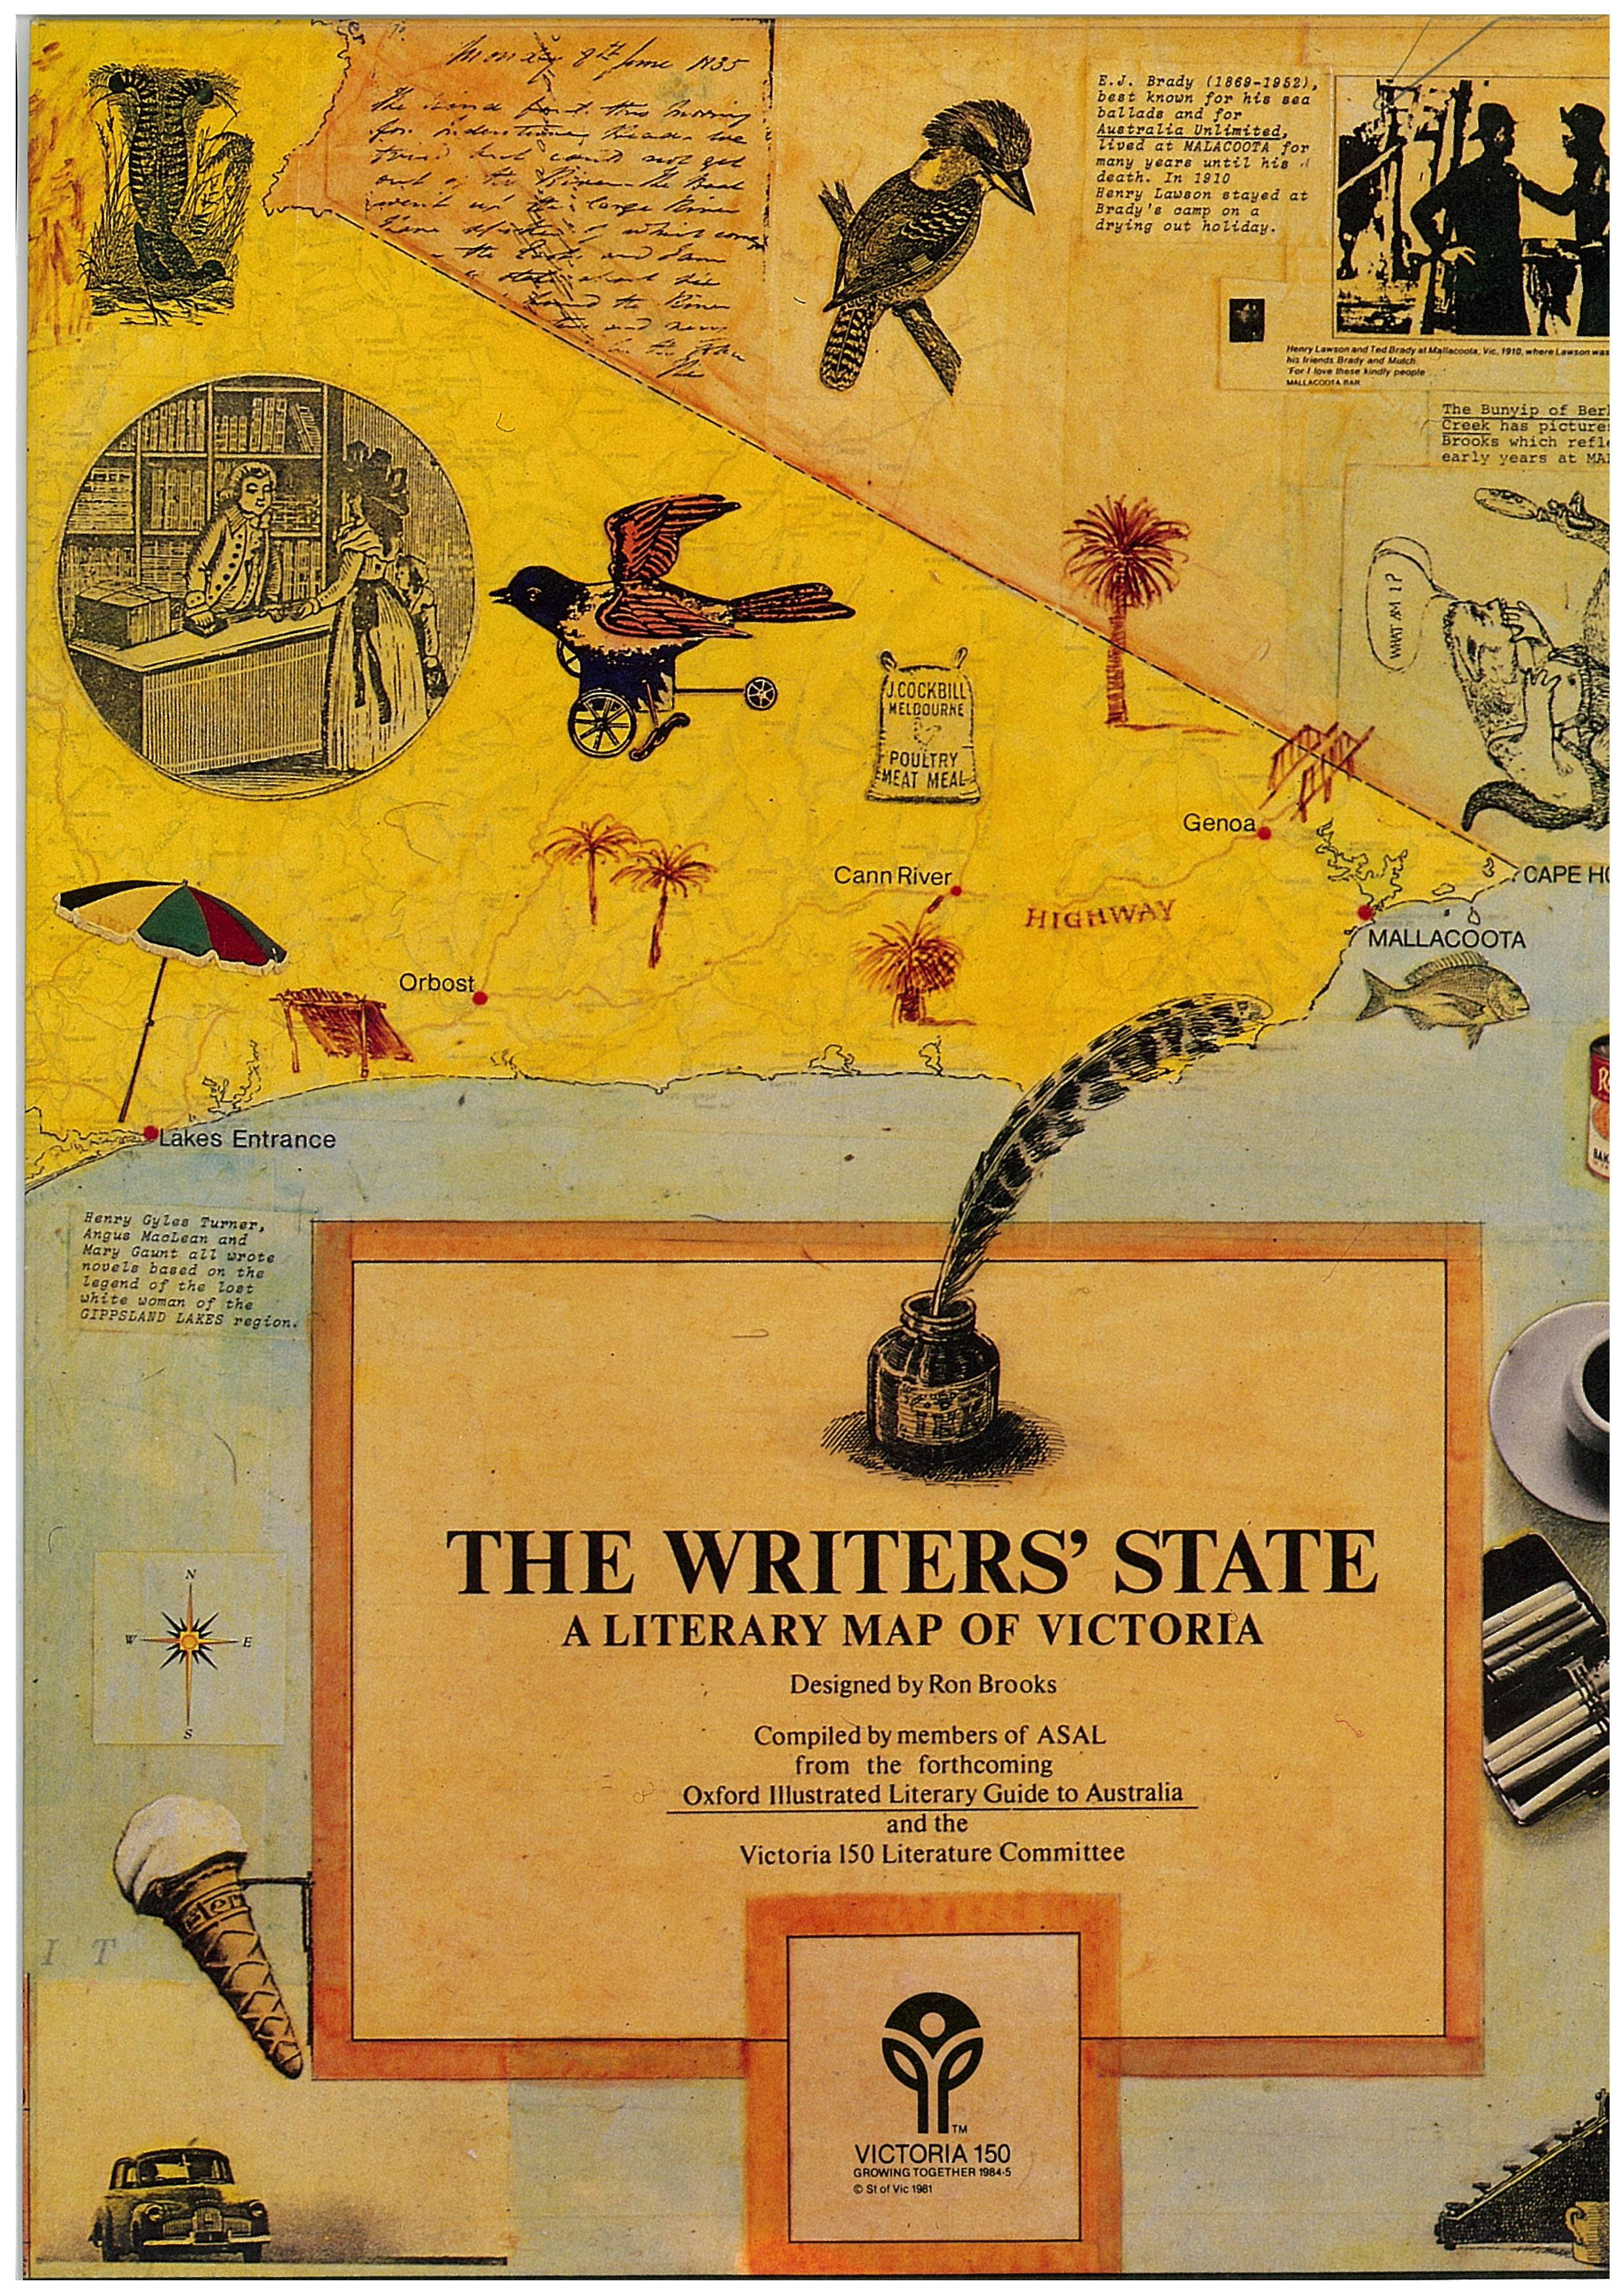 The Writers' State: a Literary Map of Victoria